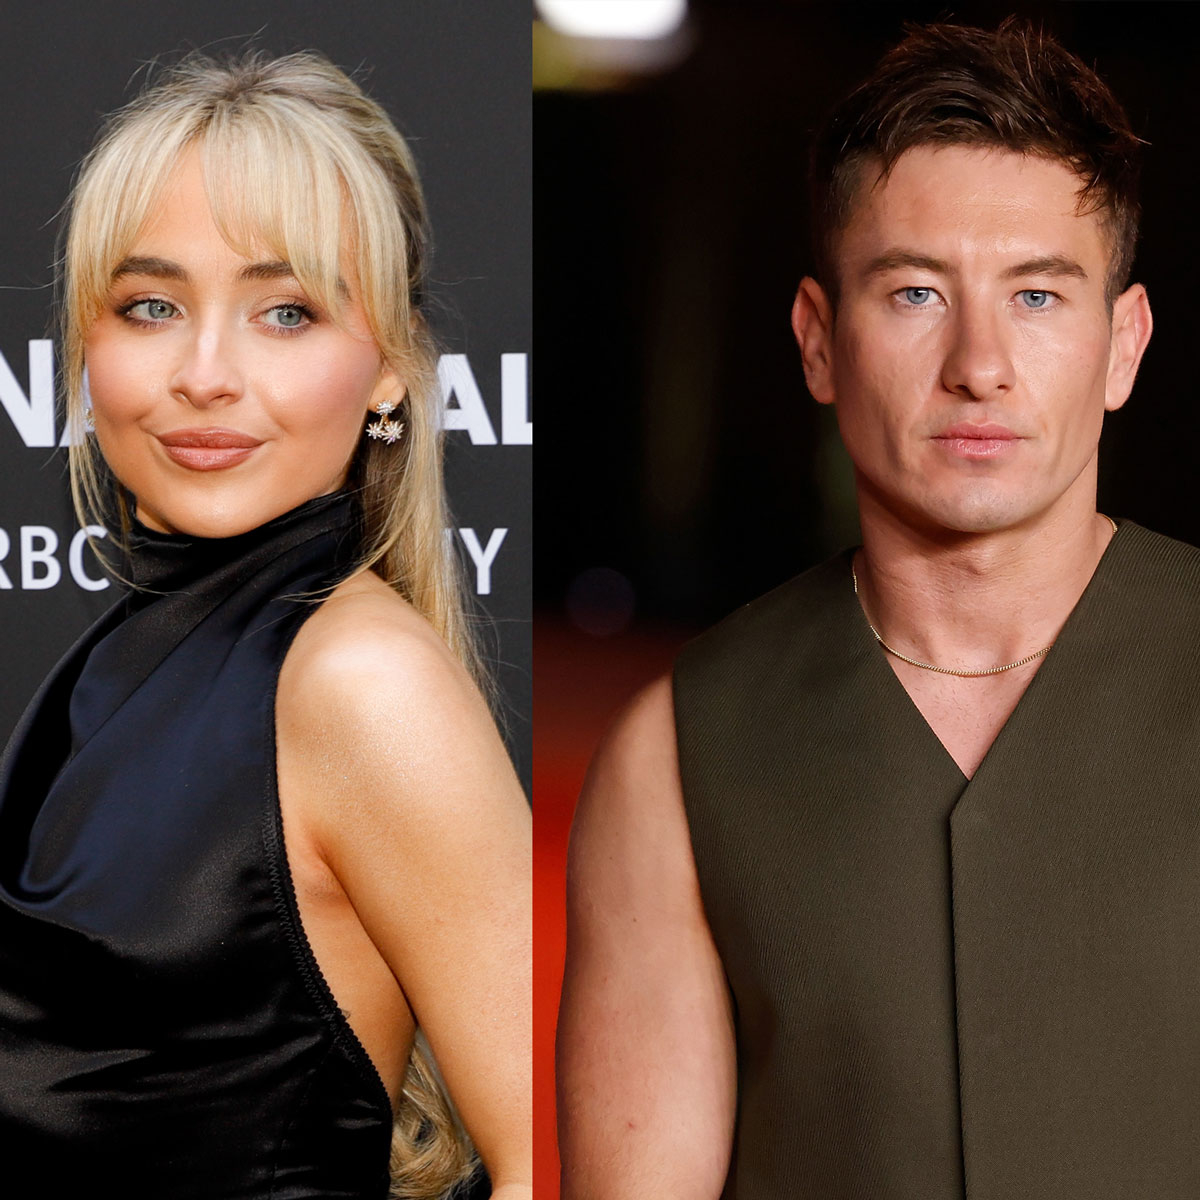 Sabrina Carpenter and Saltburn Actor Barry Keoghan Confirm Romance With Date Night Pics